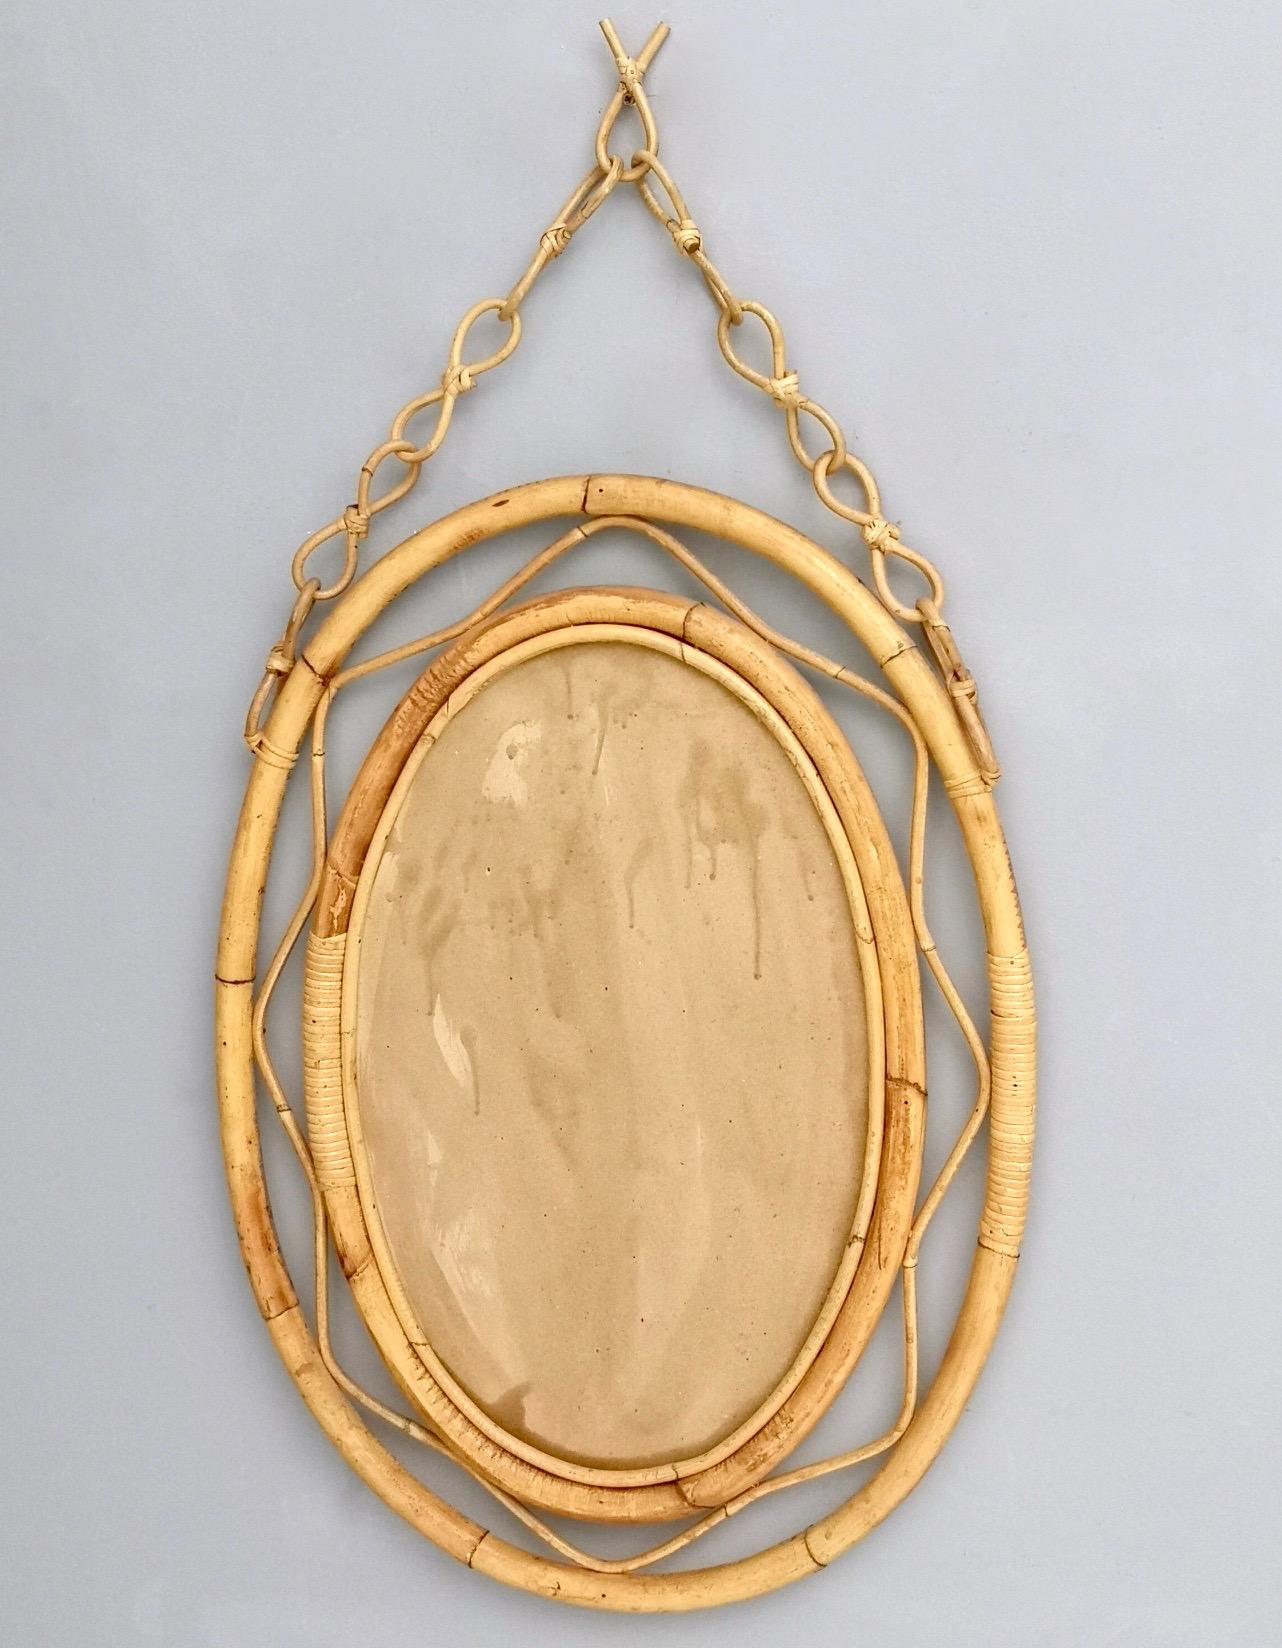 Italian Midcentury Oval Wall Mirror with a Bamboo Frame and Hanger, Italy